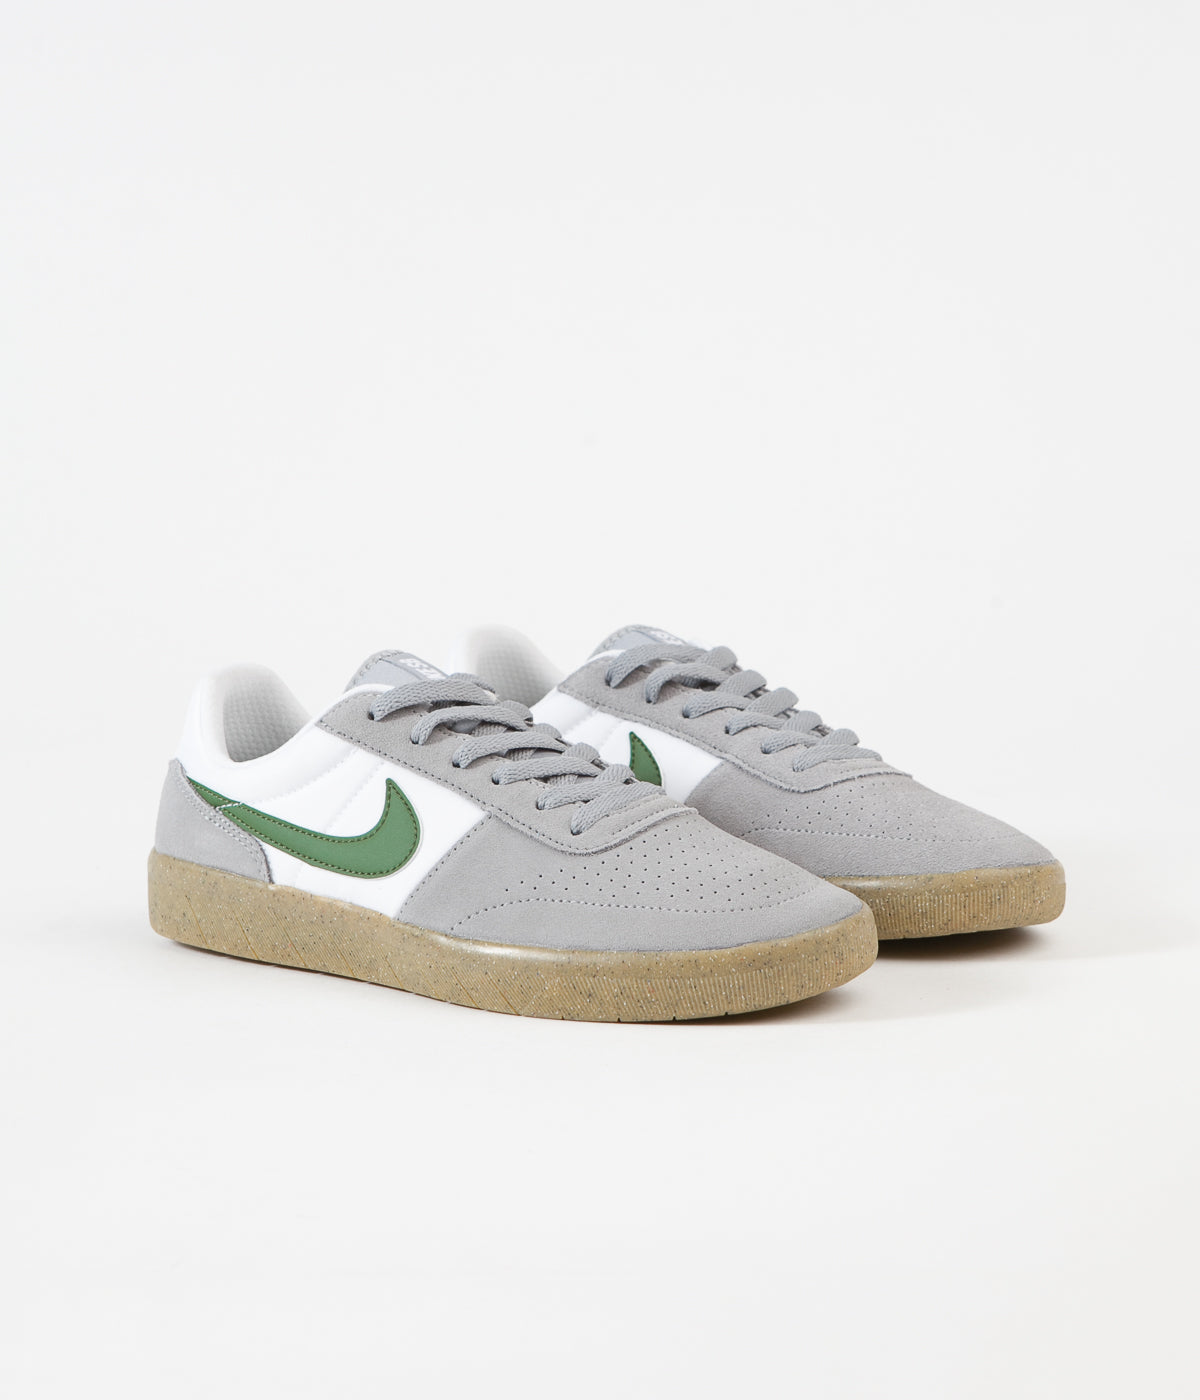 Dependiente Ambiente Mono Nike SB Team Classic Shoes | Nike Solid Mens Swimming Jammer - Particle G -  AlwancolorShops - Particle Grey / Forest Green